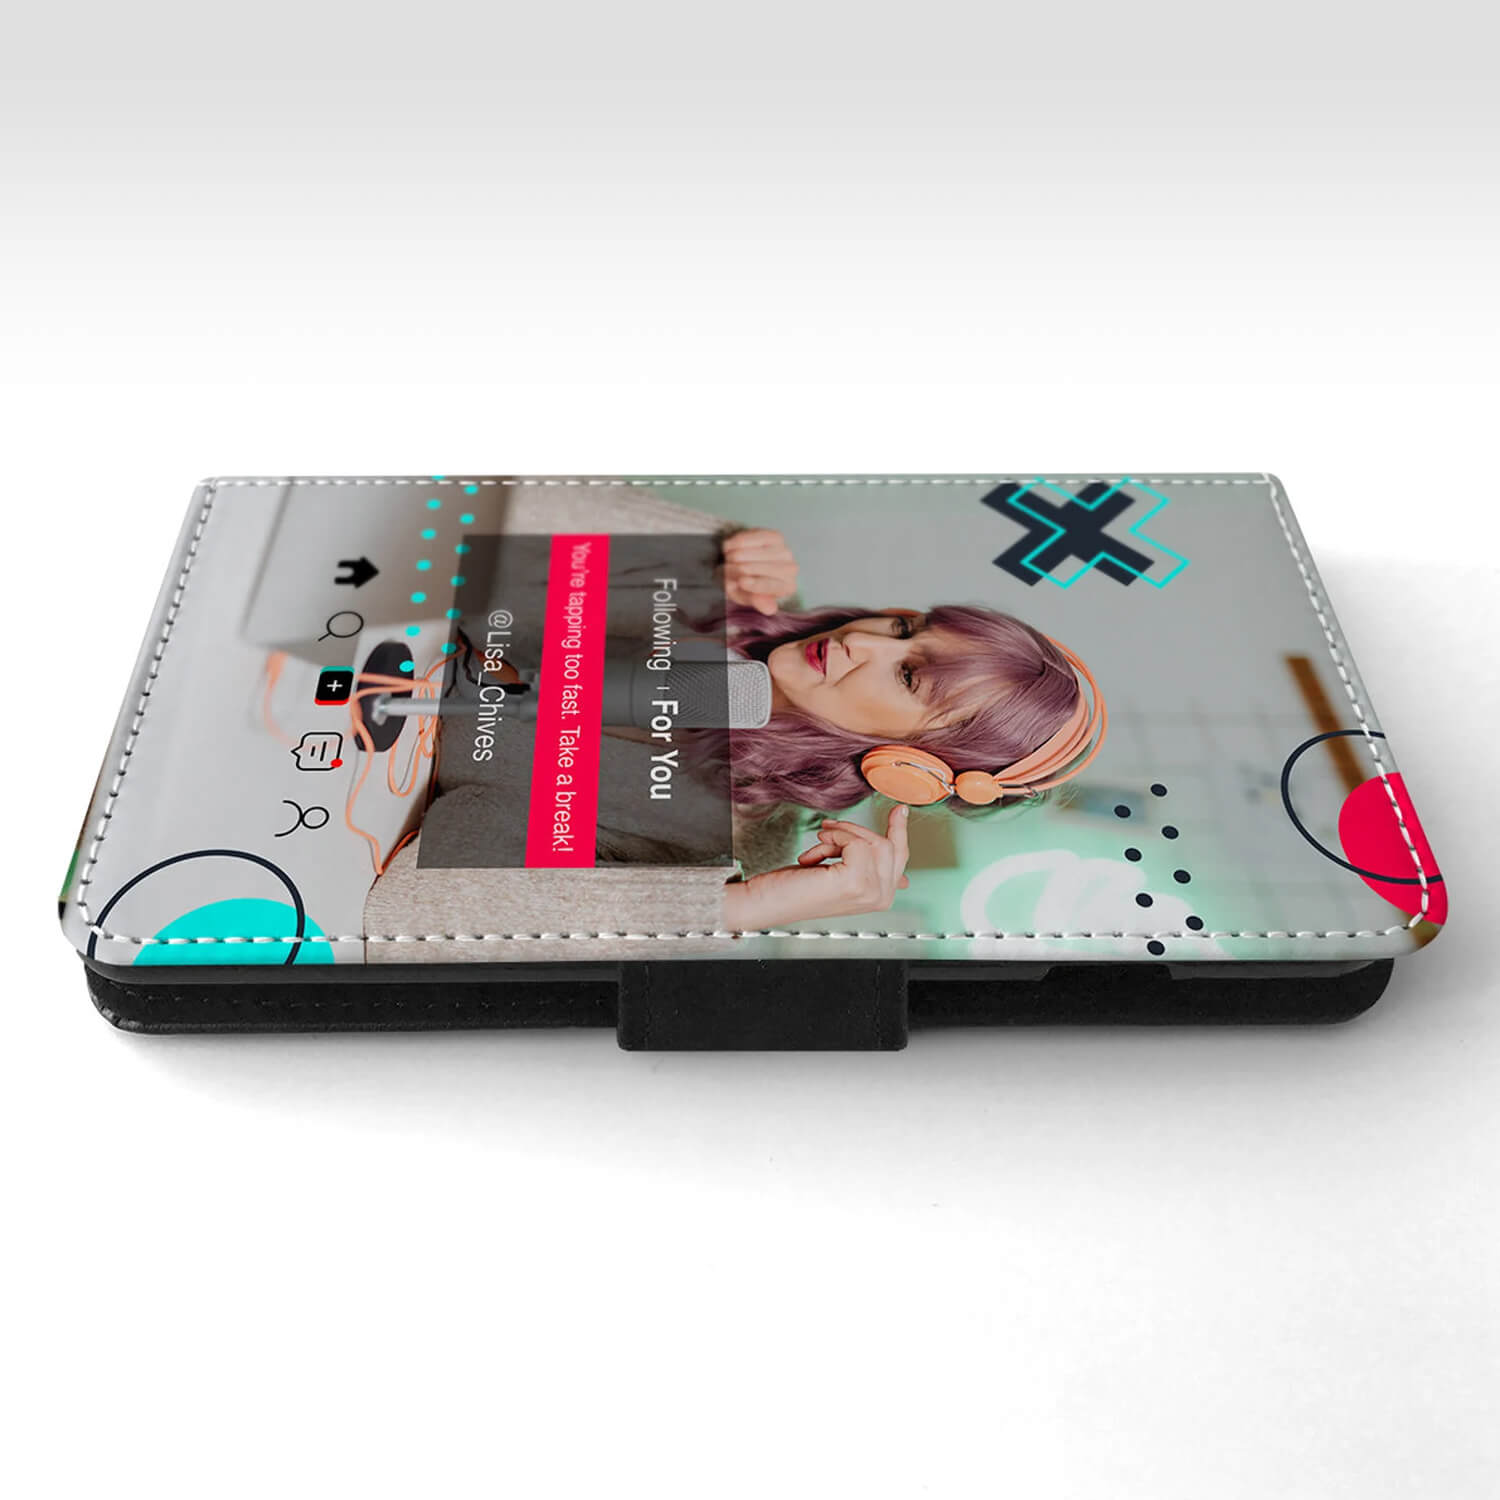 Wrappz phone case with personalised image of a woman smiling, bordered by neon shapes and features a pop-up style TikTok account details.